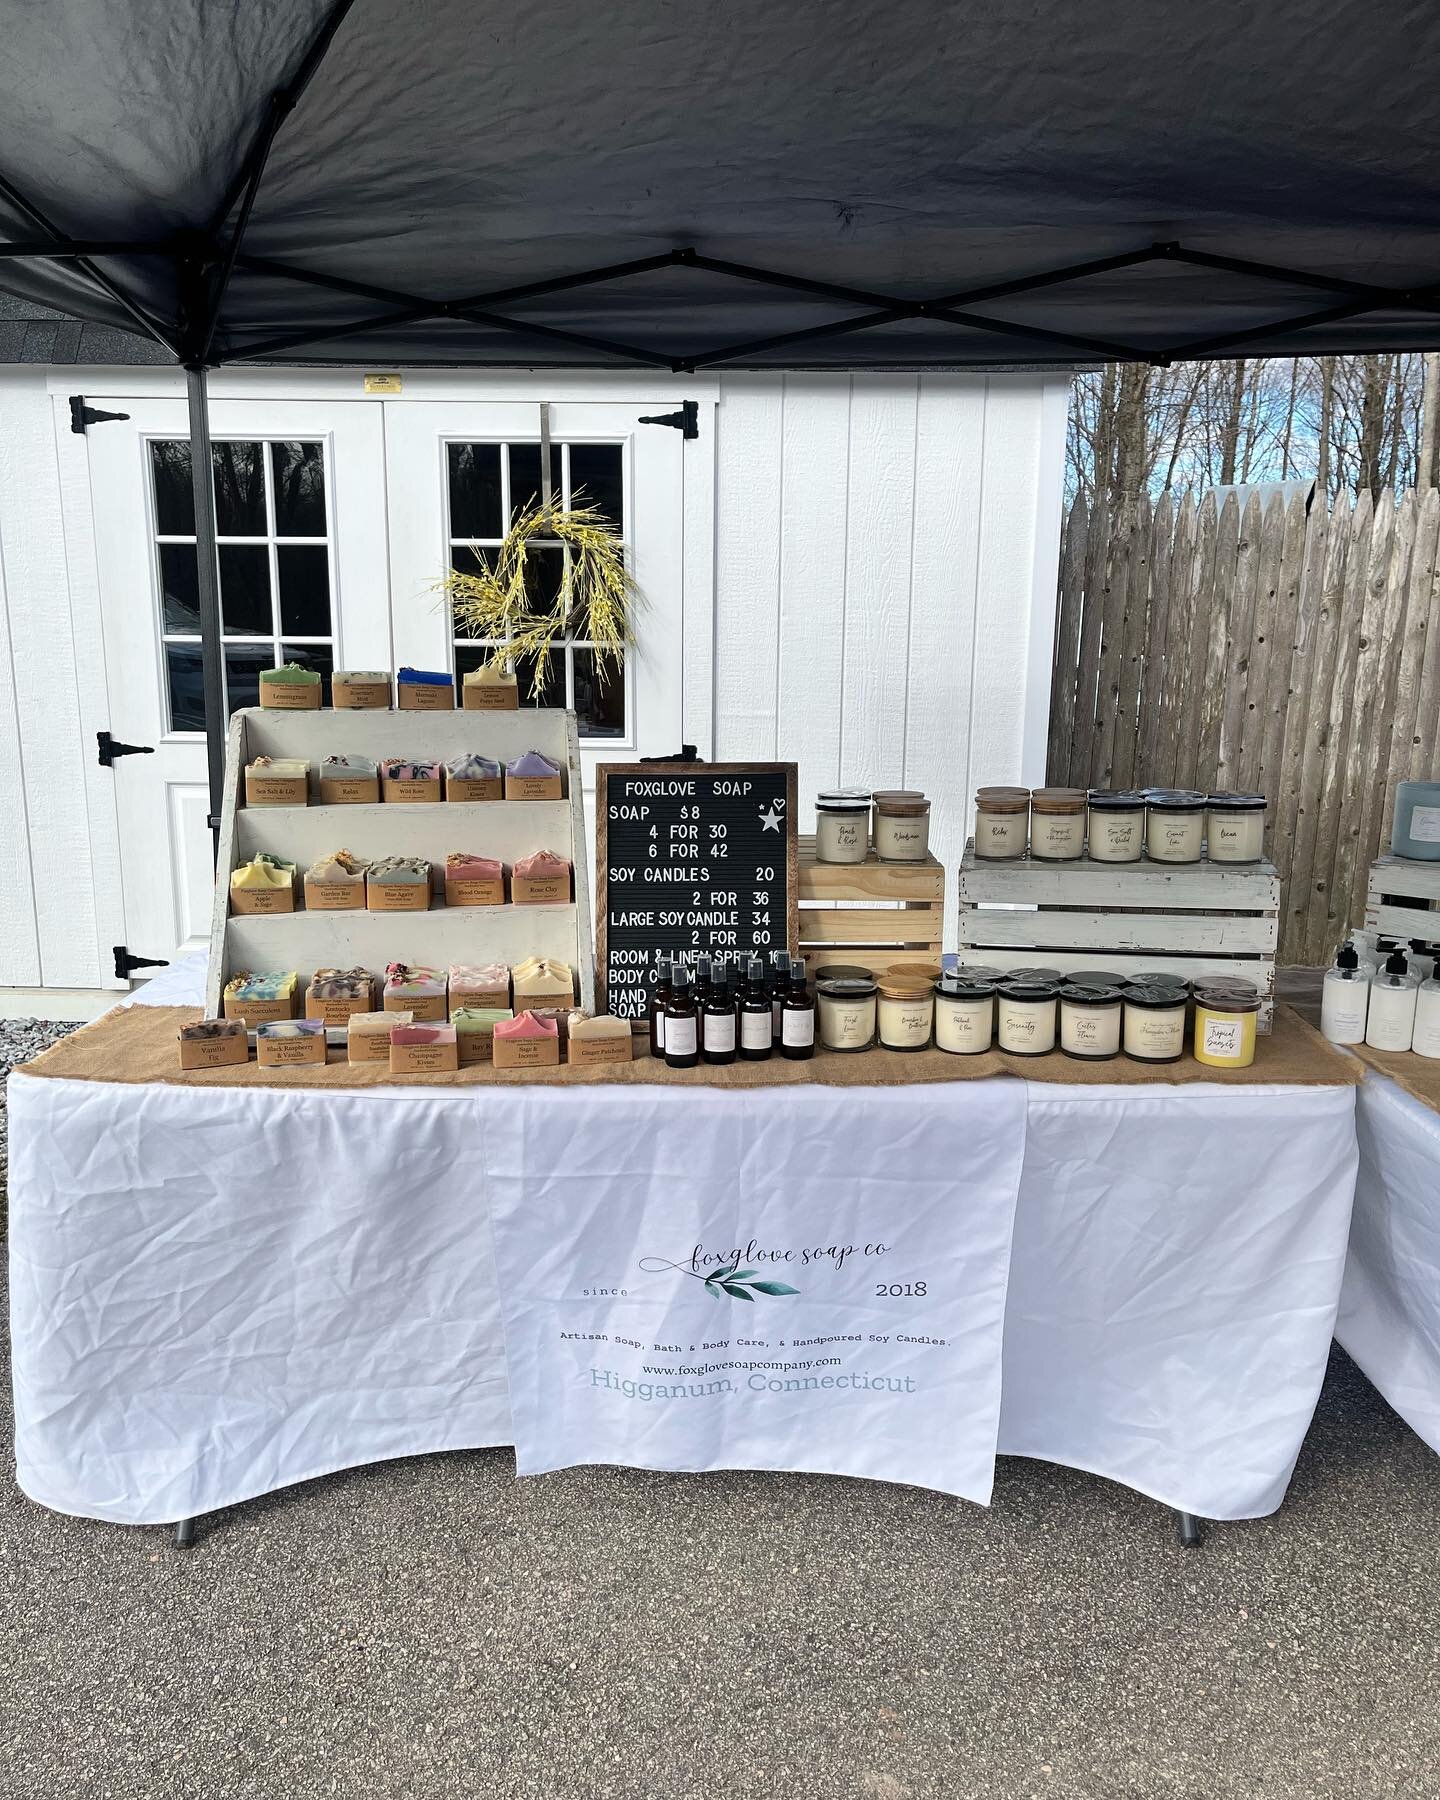 Happy Sunday friends! 😊

We are set up today from 10-4! 

Baked items include sourdough bread, bagels, and cinnamon rolls!

Soap, candles, room and linen spray, hand soap, and lotion! 

Please enjoy a FREE bag of soap ends with every purchase today 